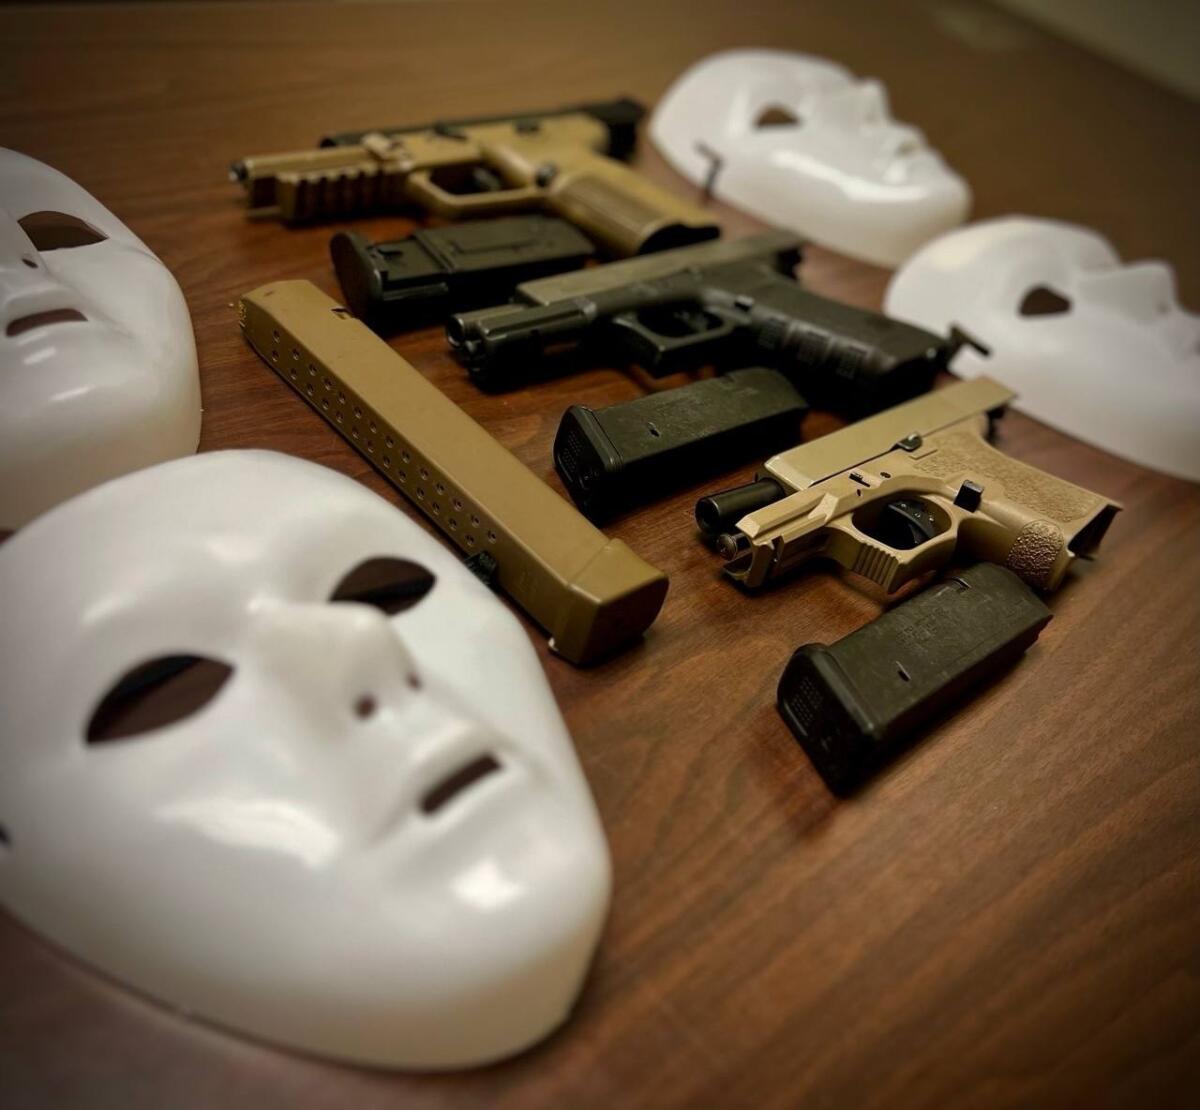 Weapons and white masks on a table.